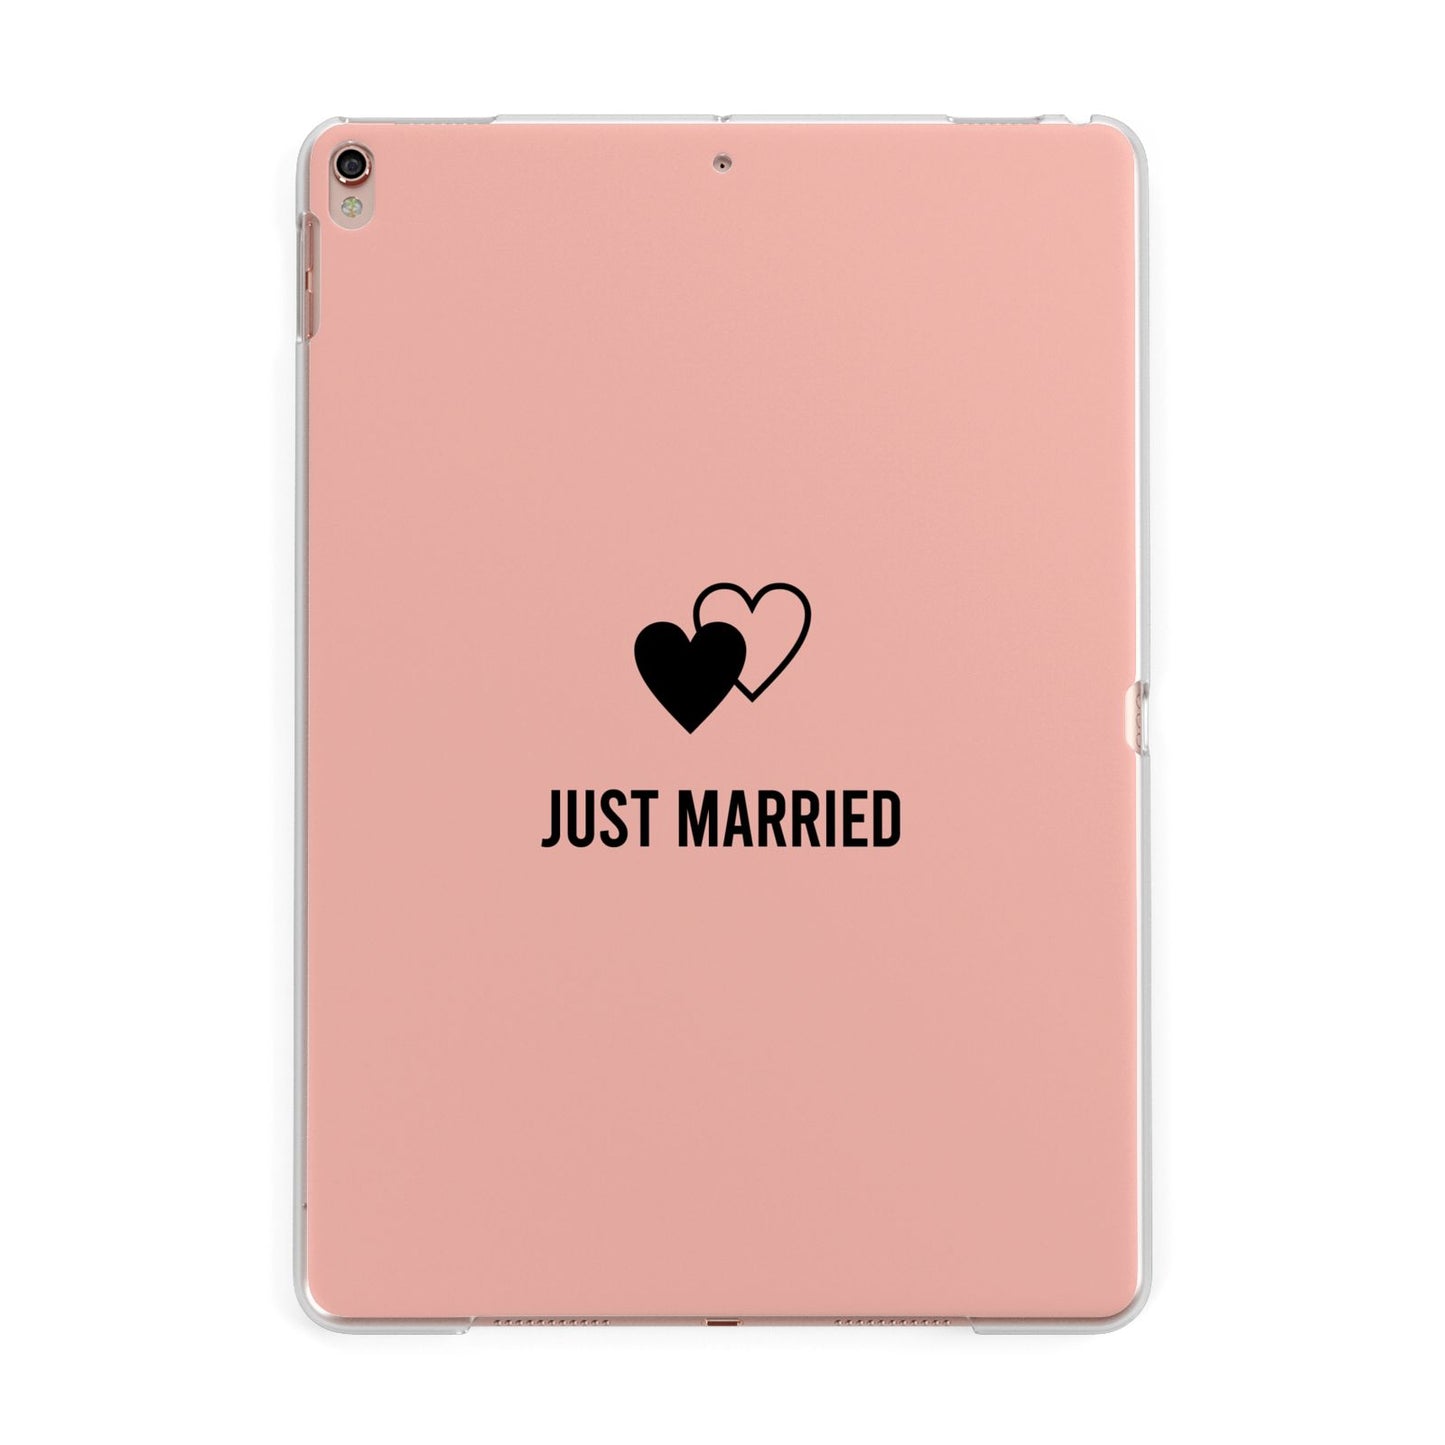 Just Married Apple iPad Rose Gold Case